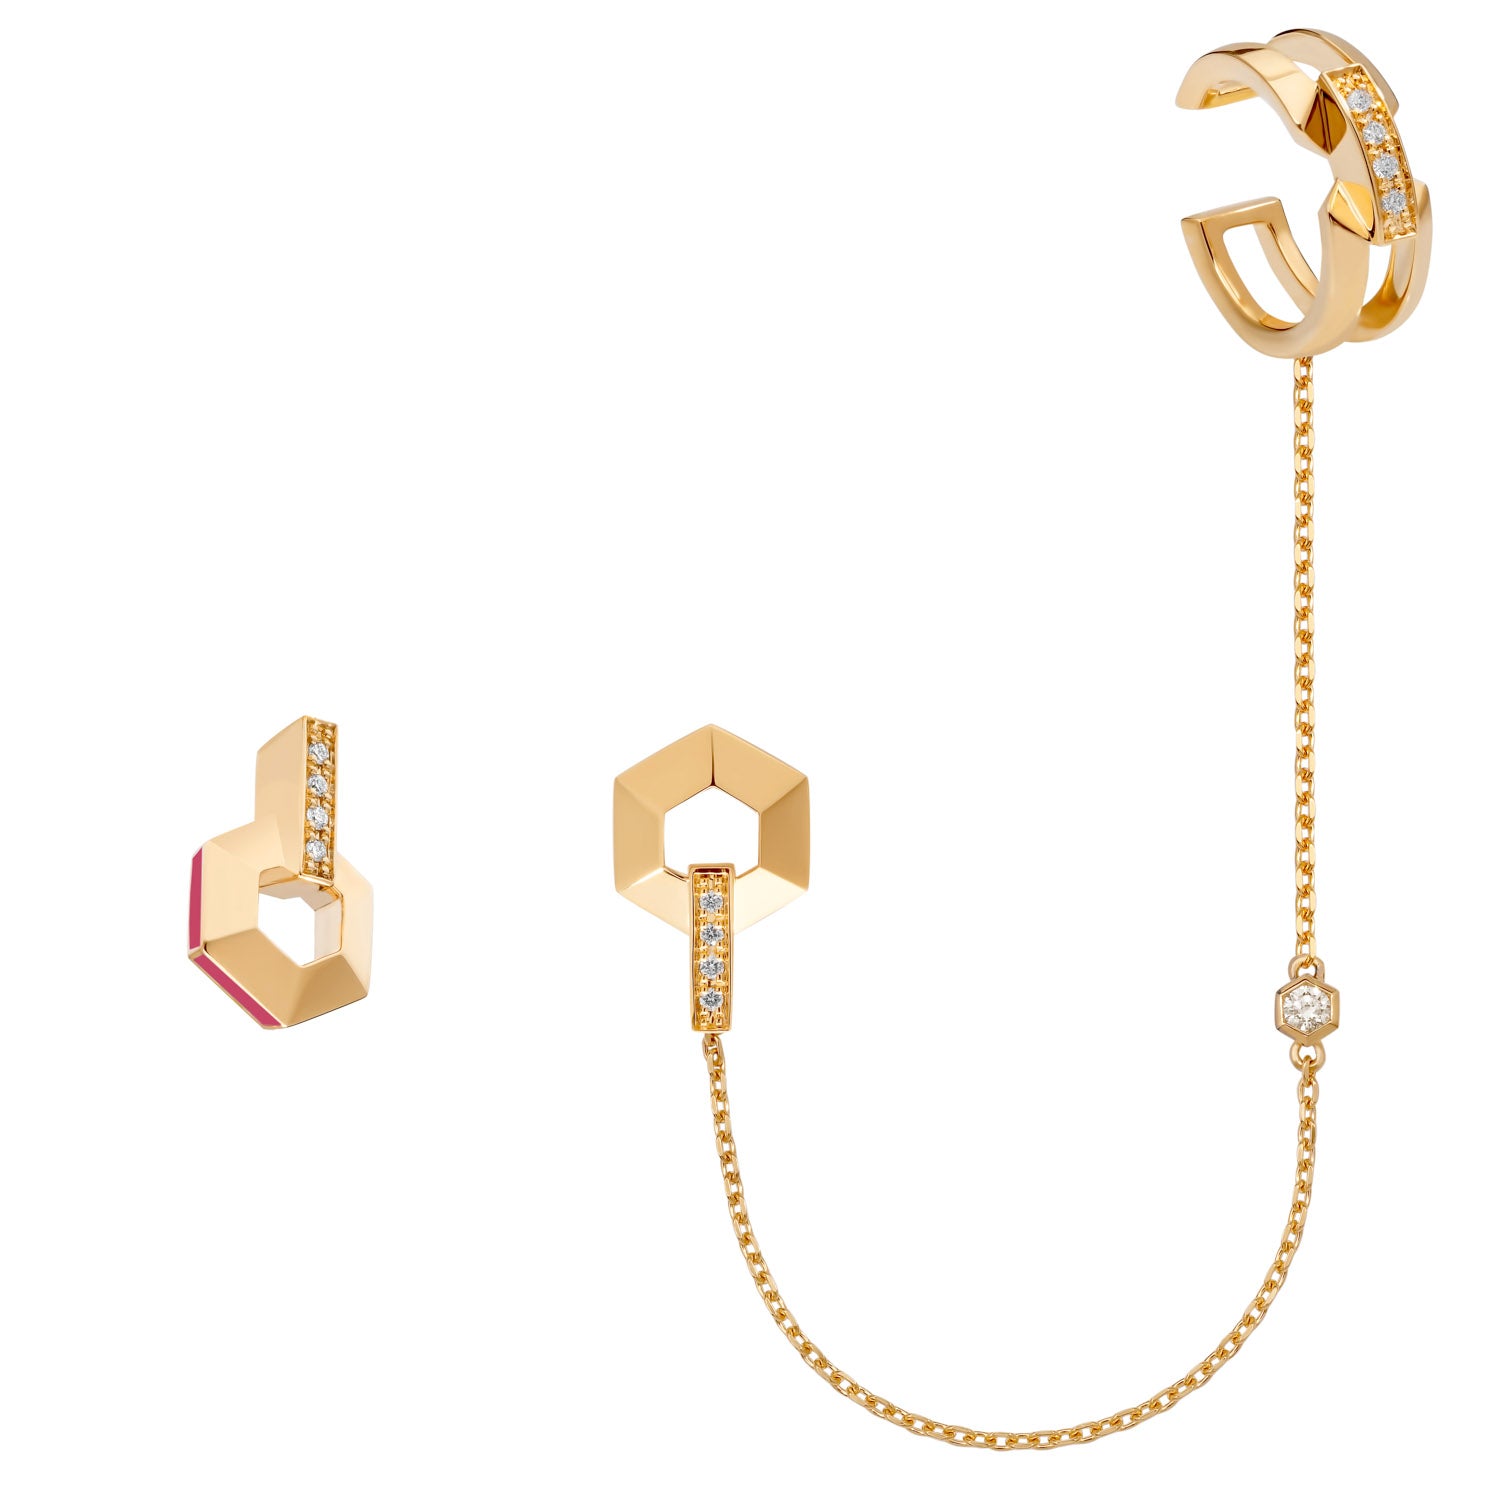 HONEY HONEY Small Earrings with Ear Cuff and Diamonds